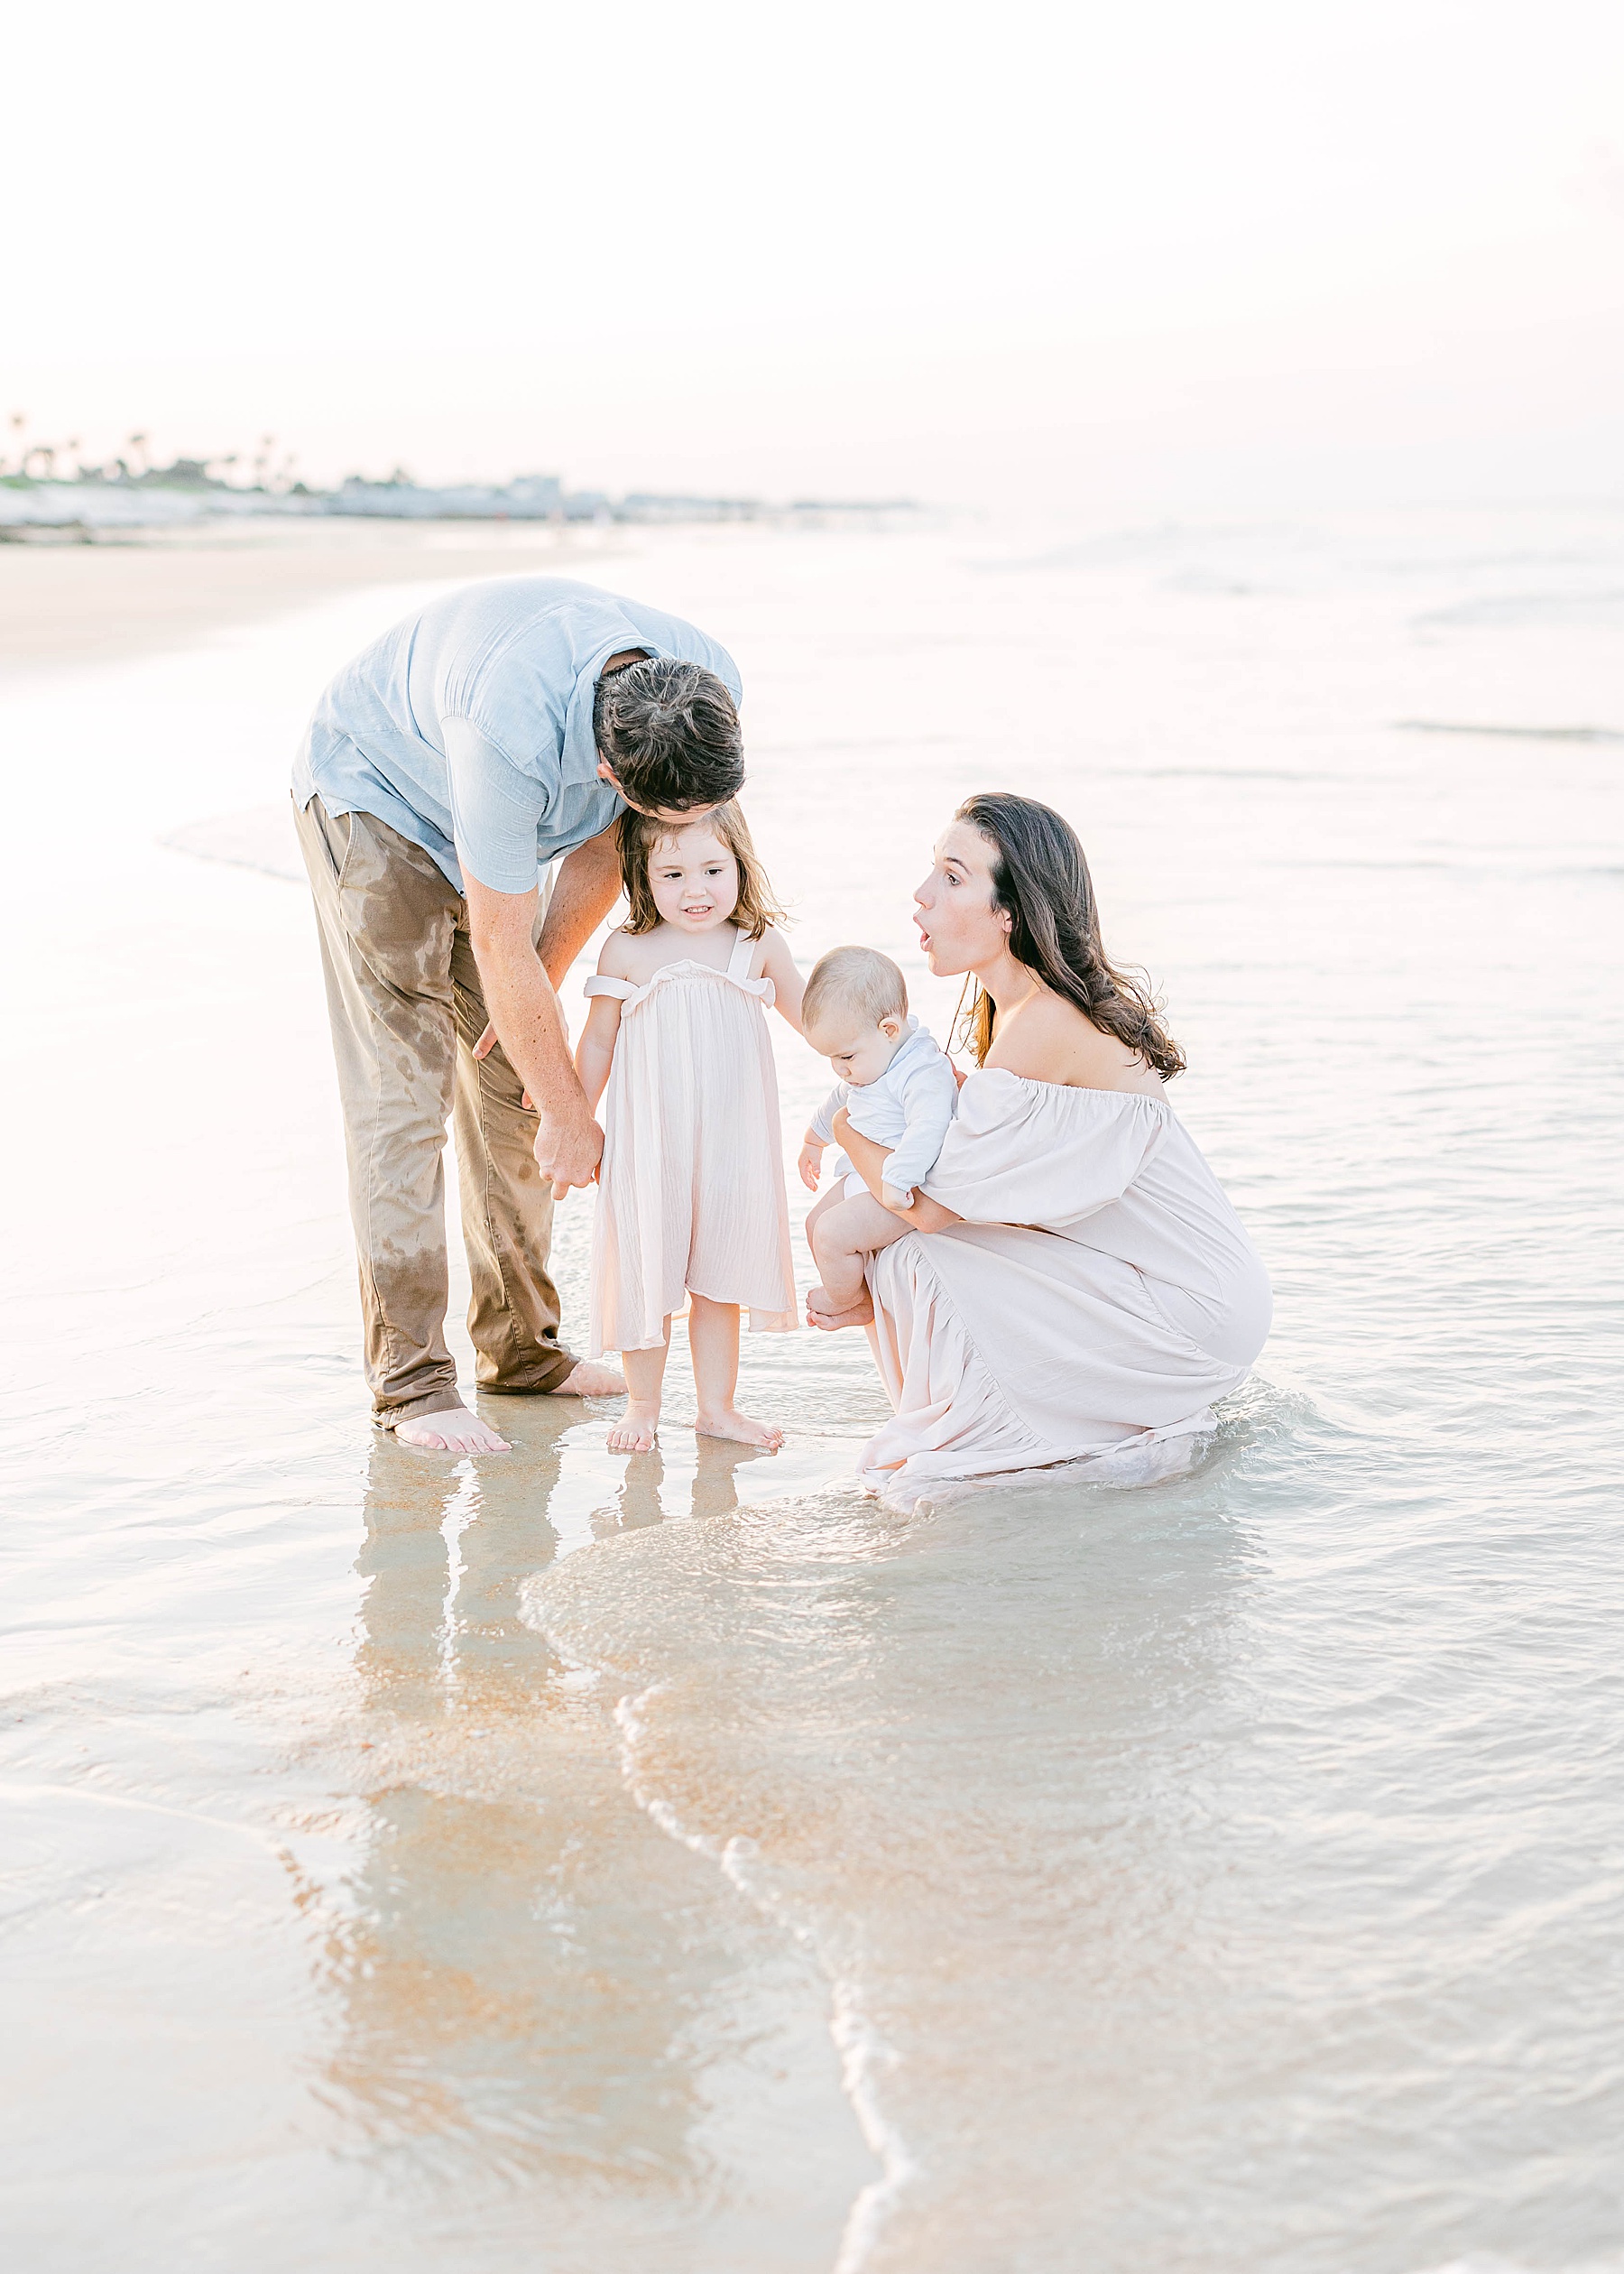 family standing together along the shoreline at sunset wearing pastel colors